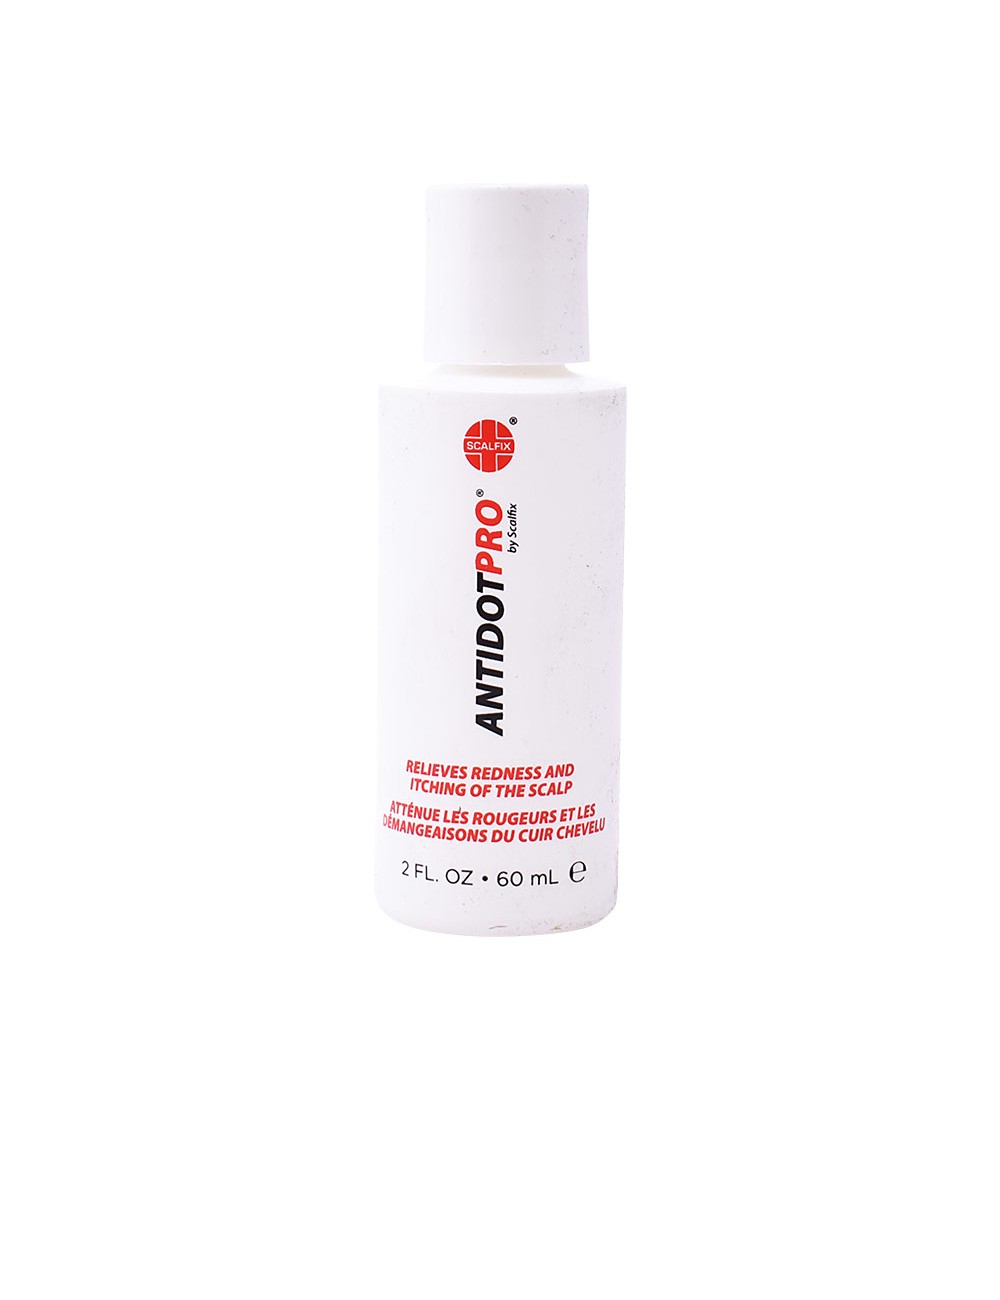 ANTIDOT PRO relieves redness & itching of the scalp